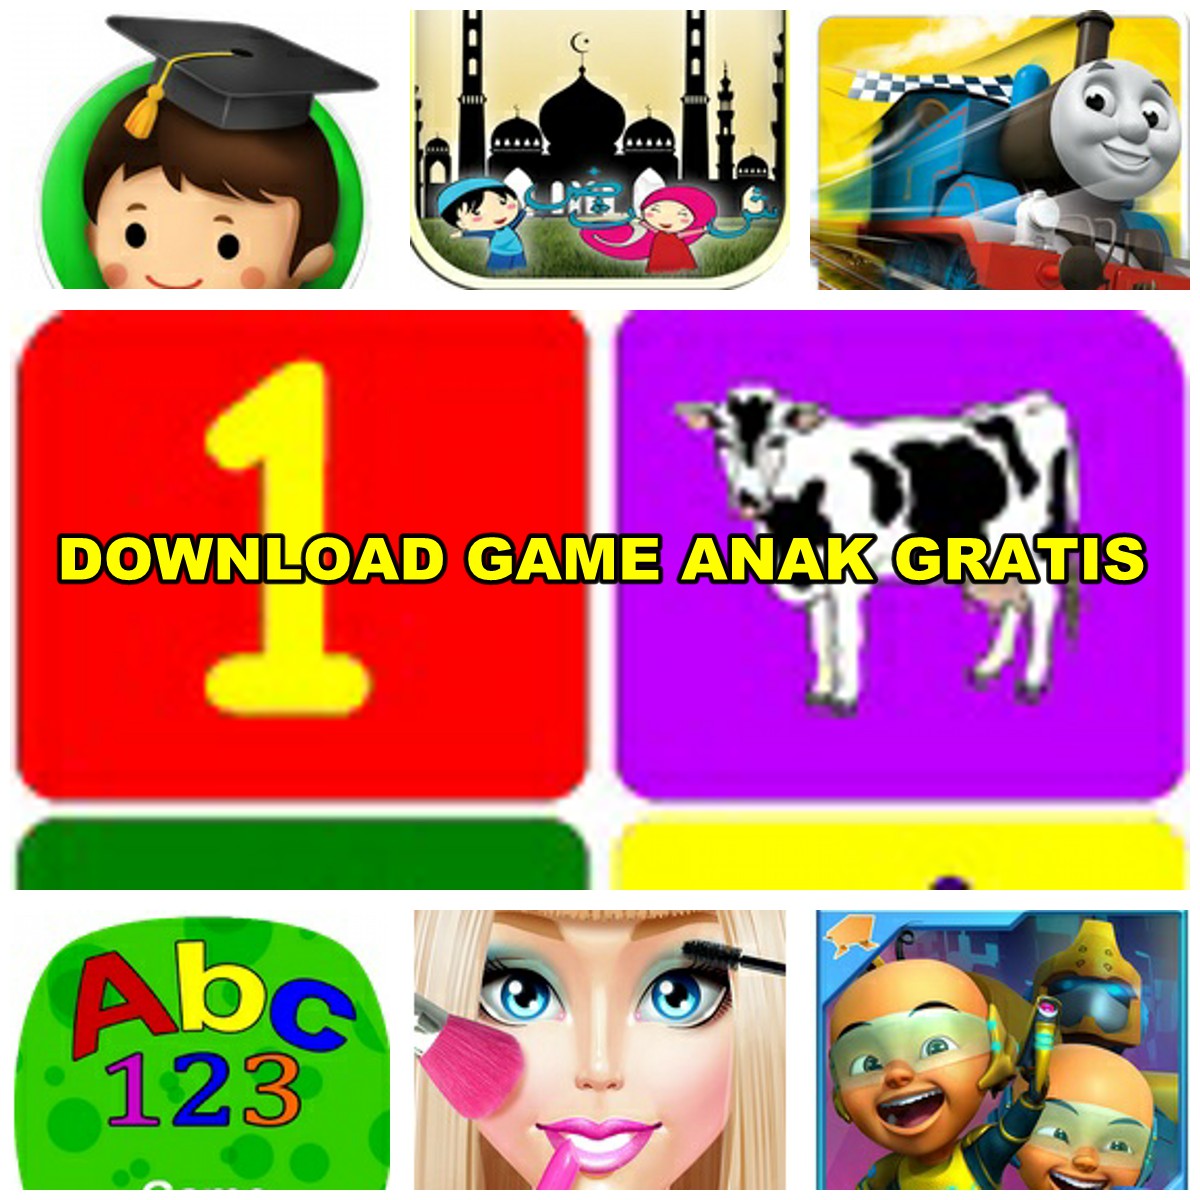 Download Game Anak GRATIS for Android